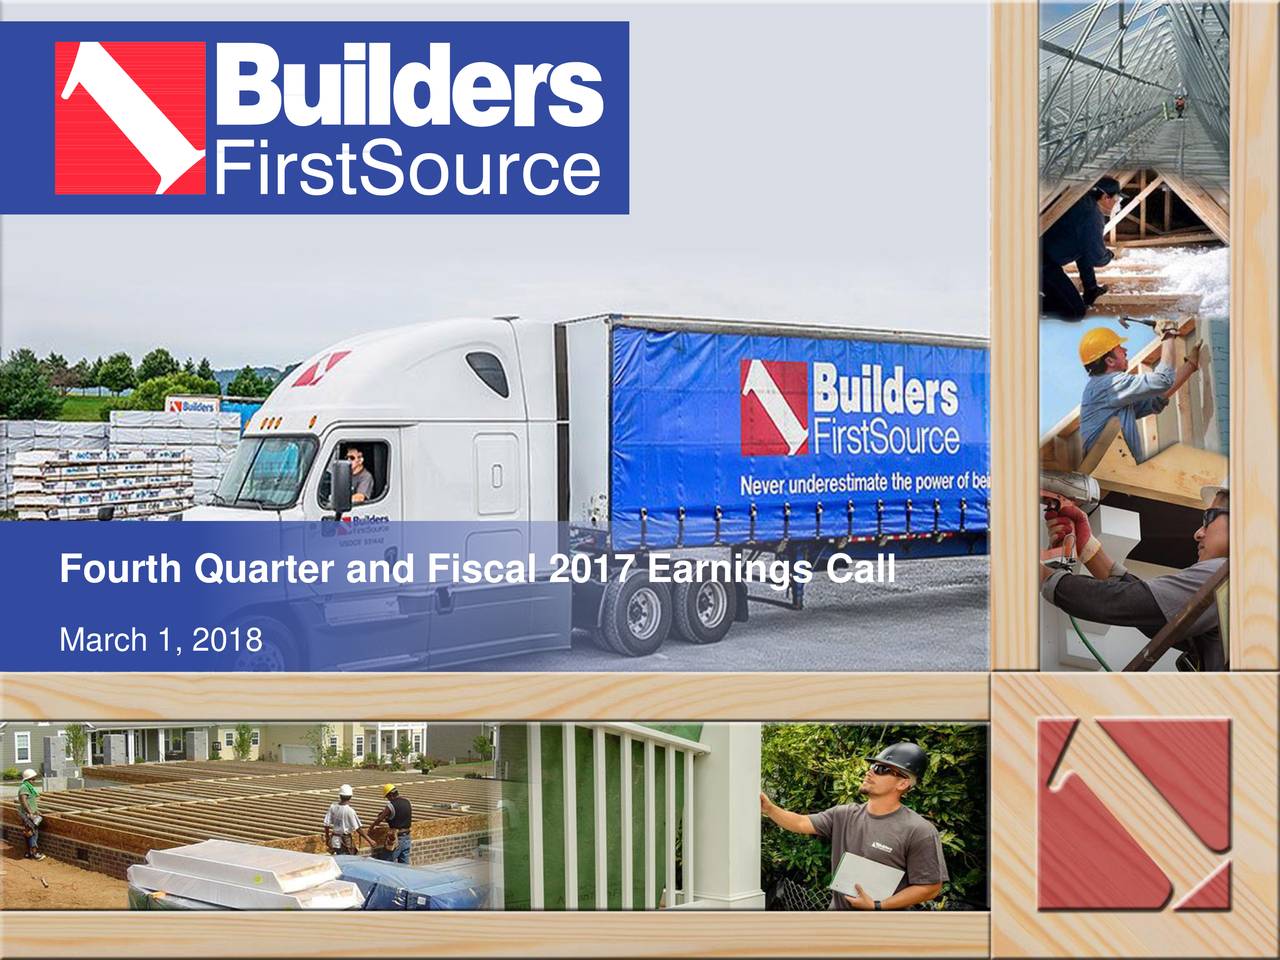 Fourth Quarter and Fiscal 2017 Earnings Call